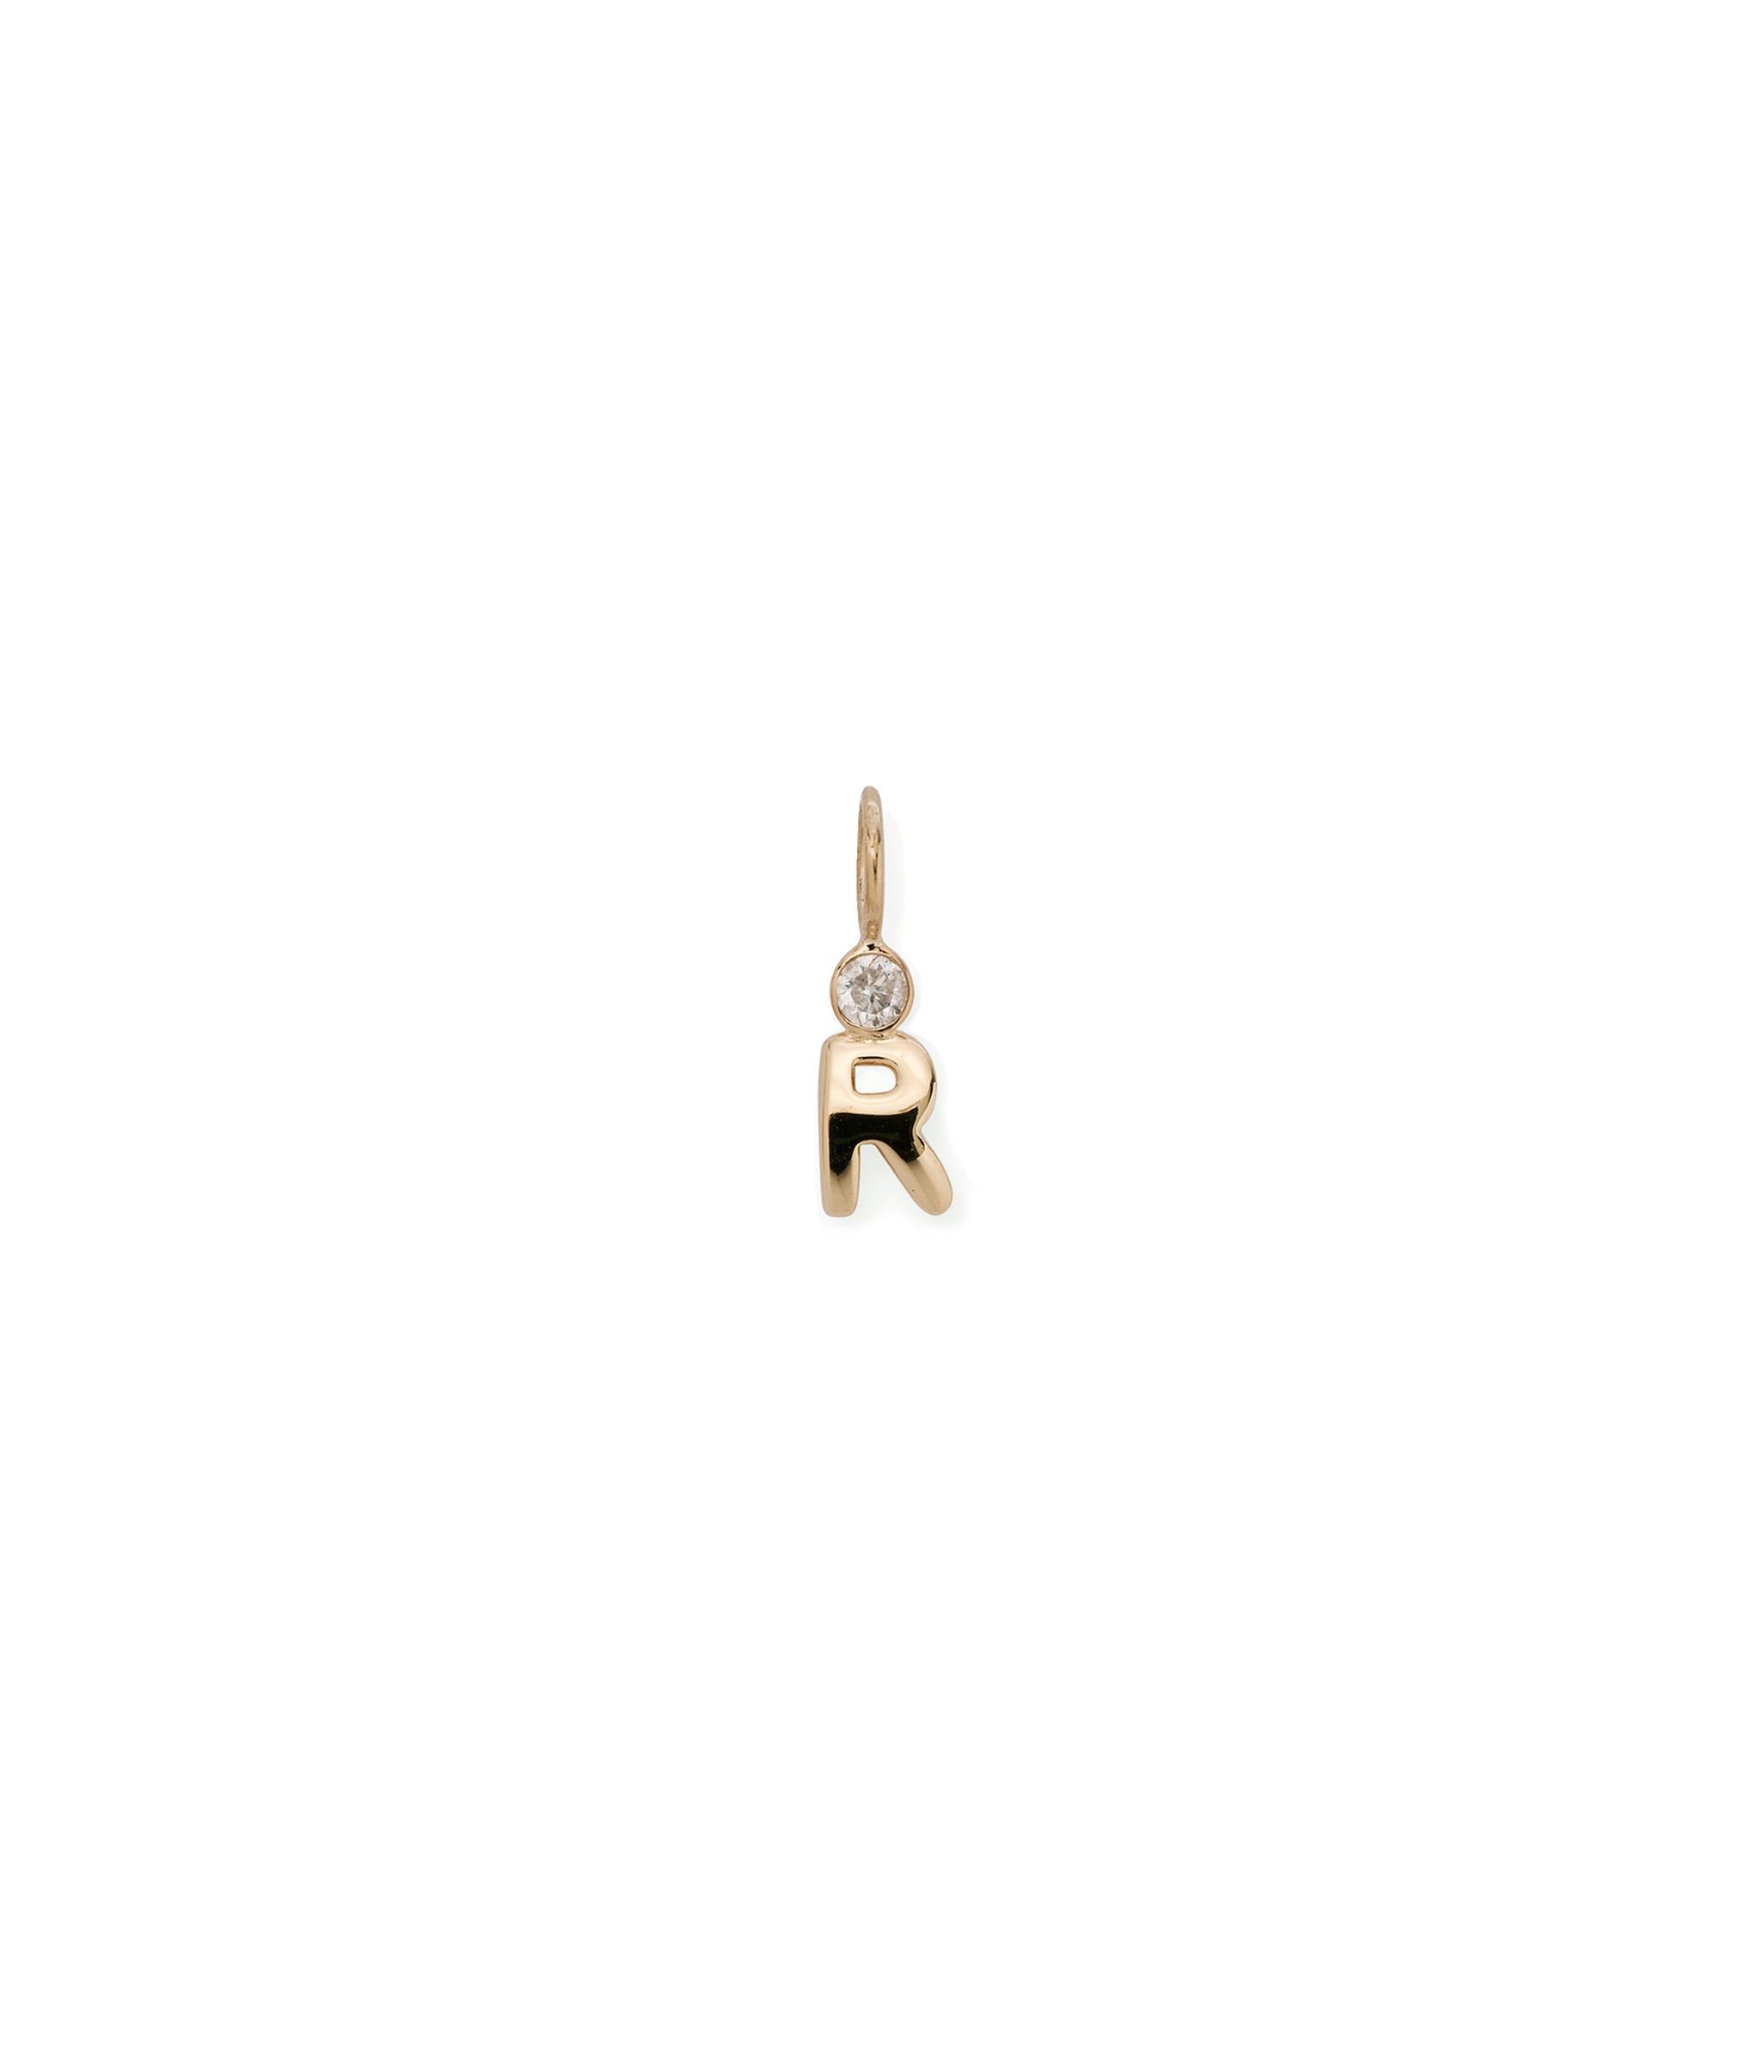 Alphabet Soup "R" Charm. Puffy mini 14k gold letter "R" charm with round diamond accent.